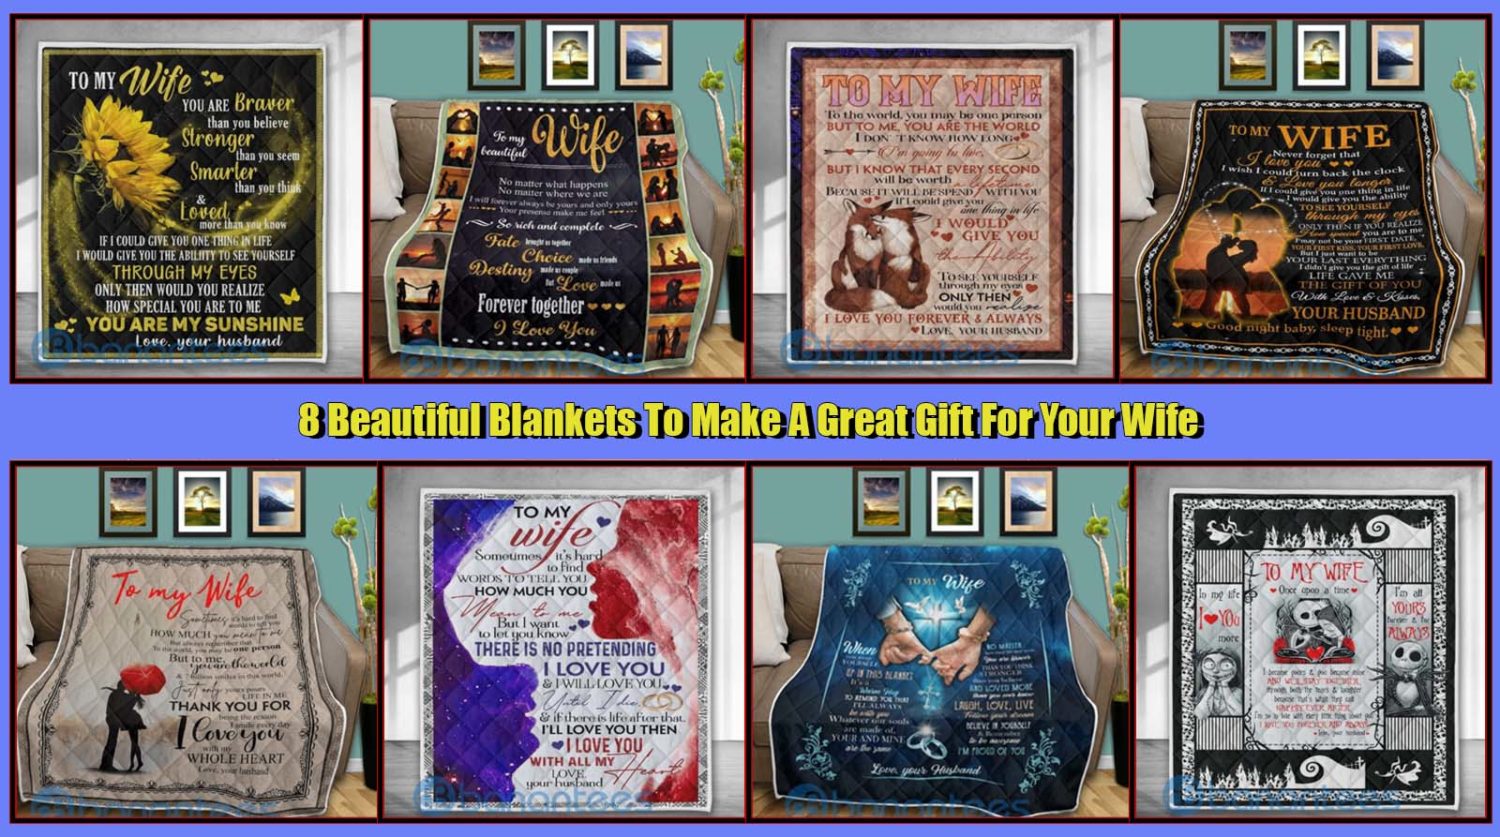 8 Beautiful Blankets To Make A Great Gift For Your Wife